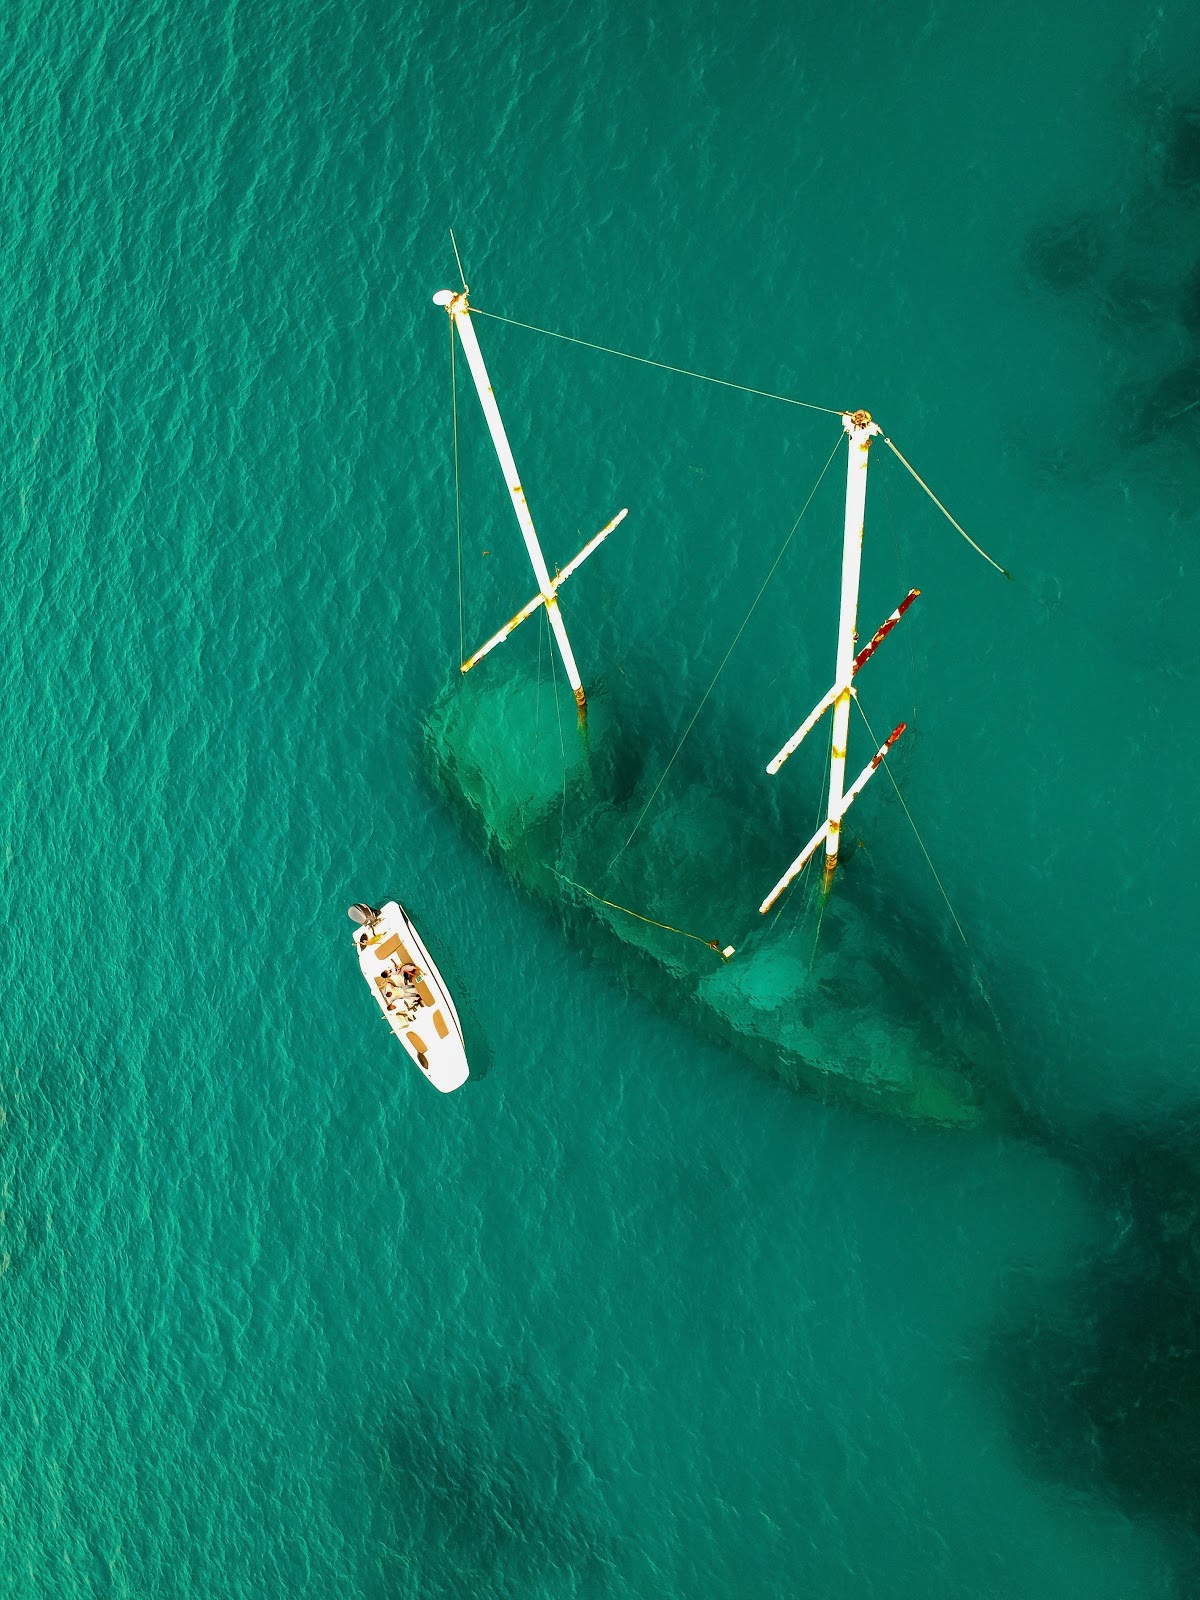 A small boat sails by a larger boat that is almost completely submerged in the ocean.